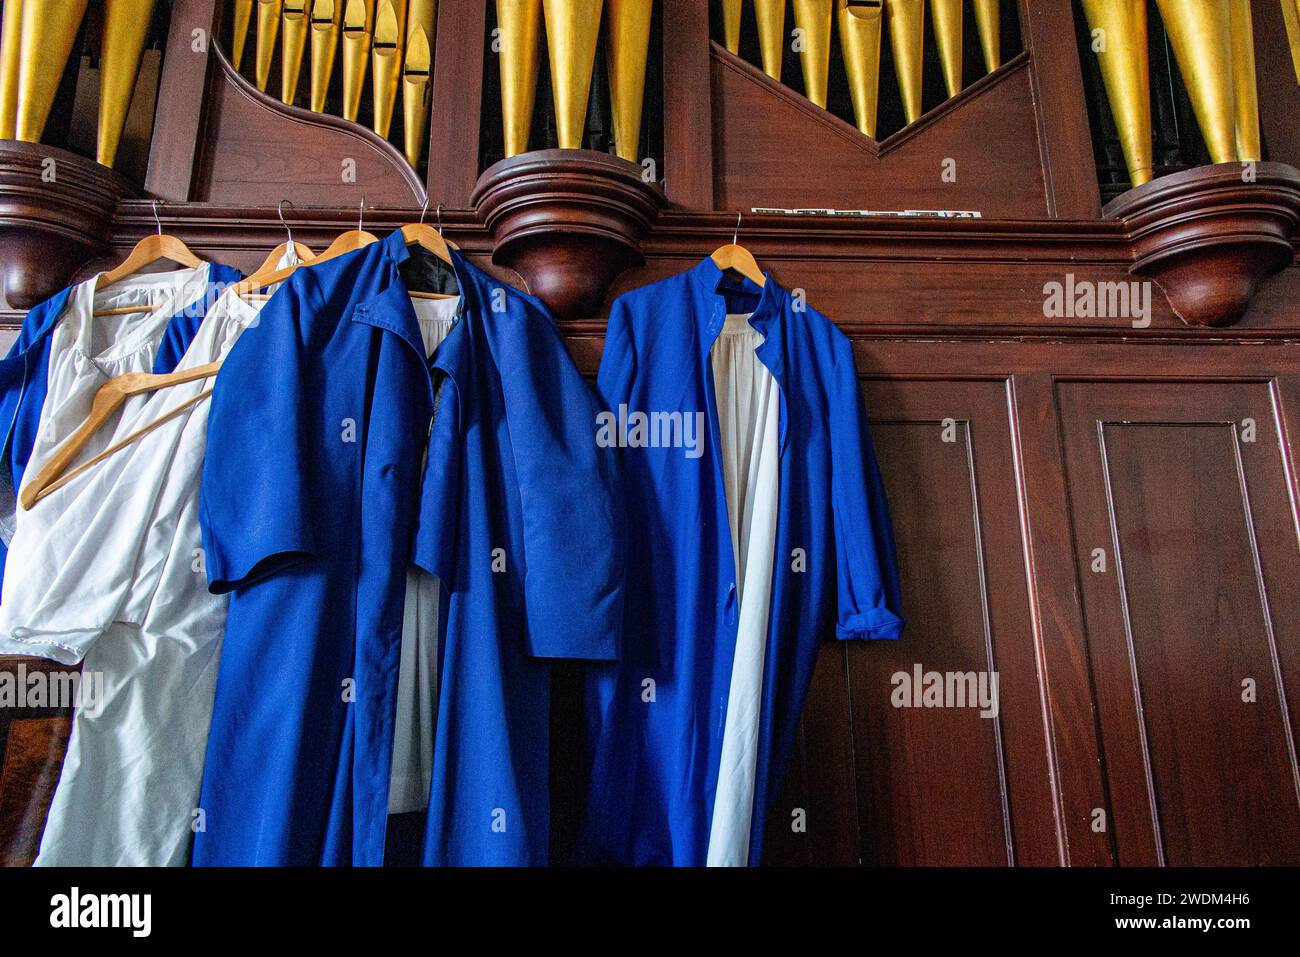 Robes hanging by the organ in the Ordinariate of Our Lady of Walsingham church in Soho, London Stock Photo